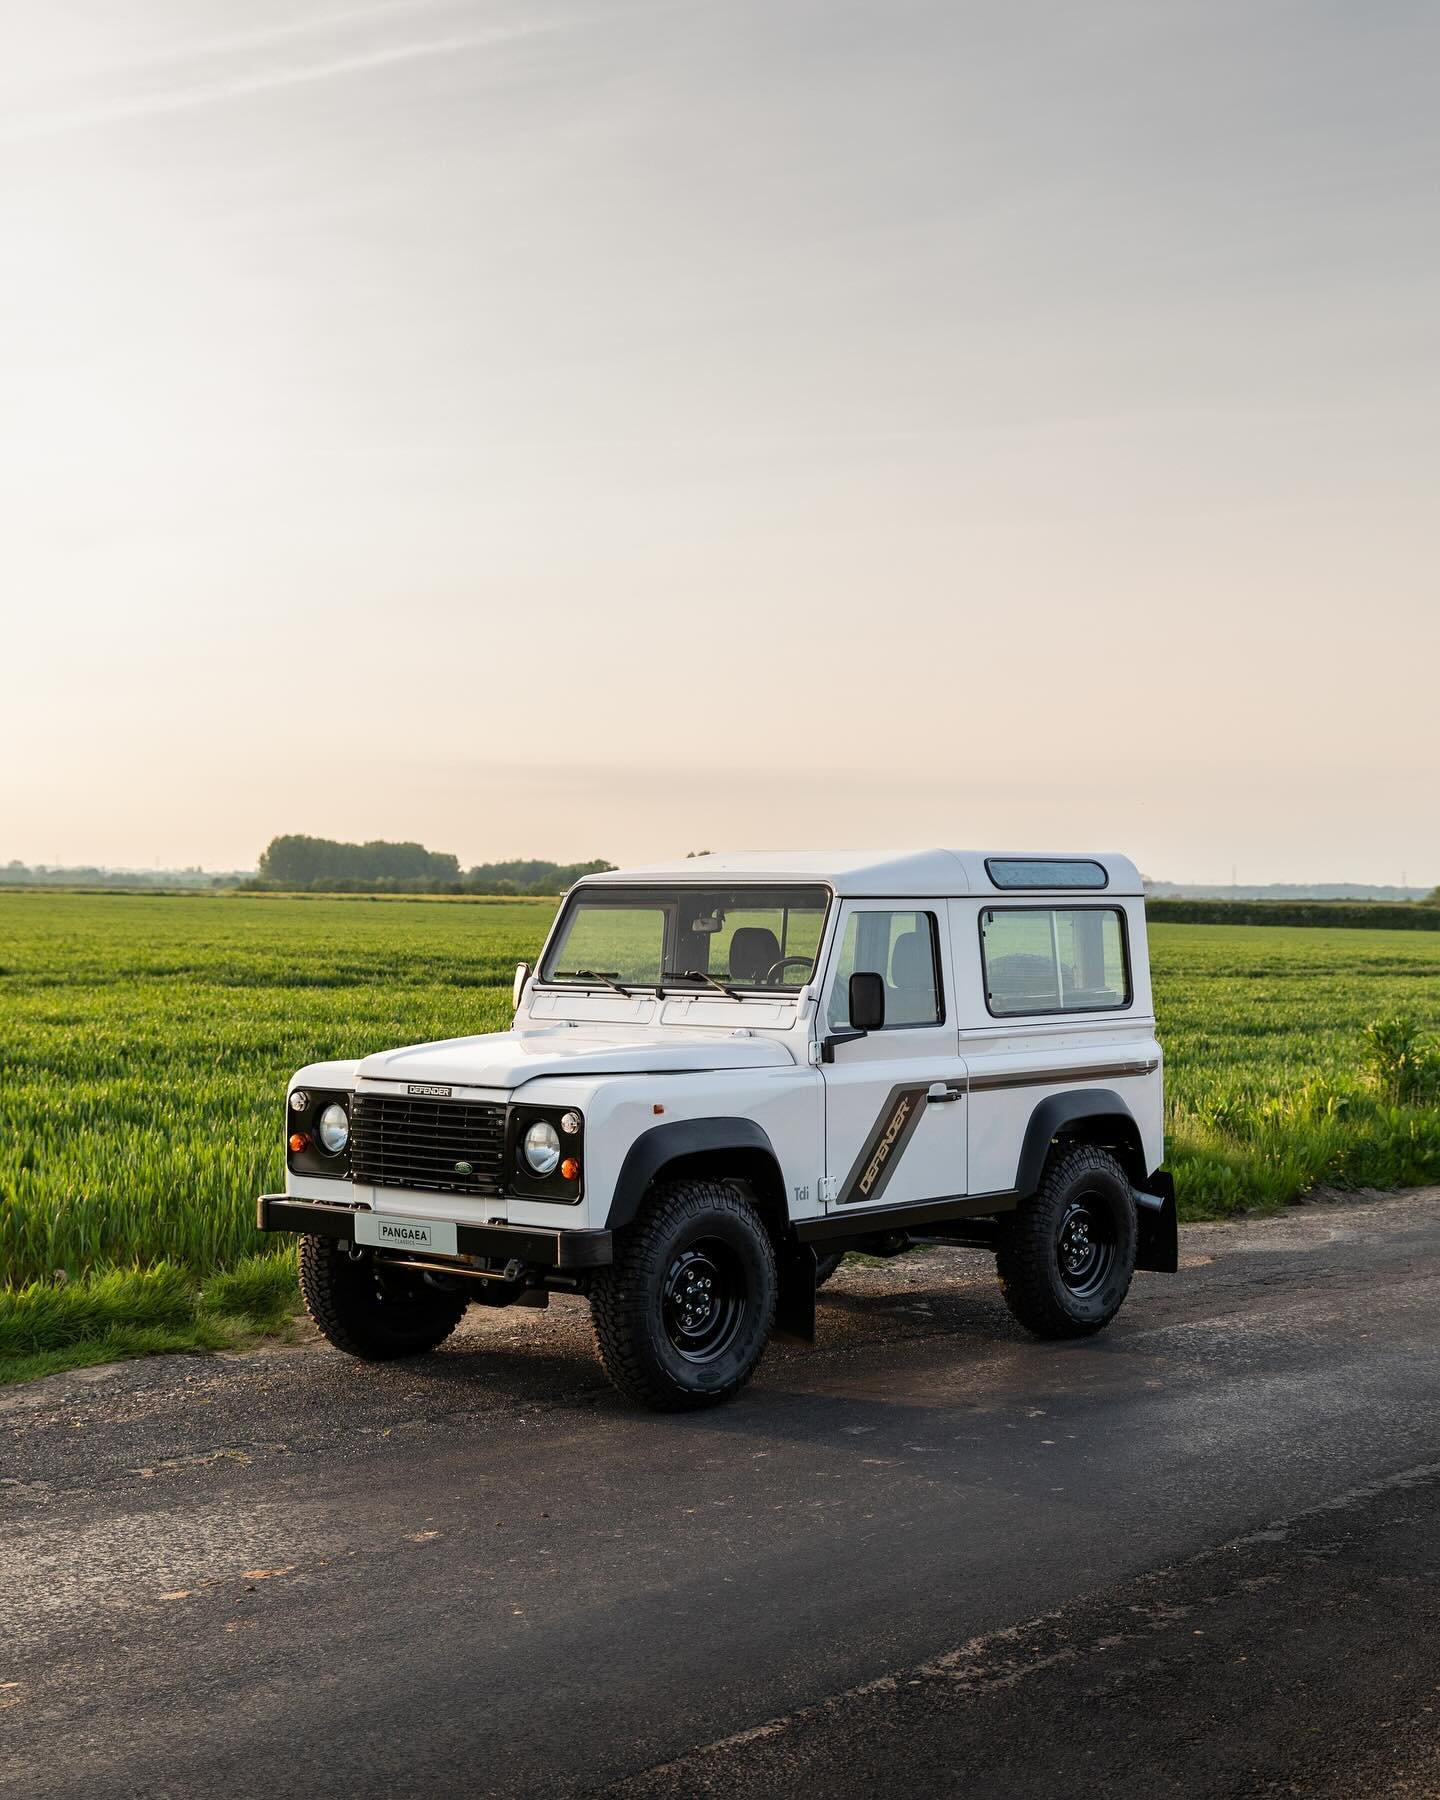 Black and White. It&rsquo;s looks so good, it would be rude not to share a couple more photos!

Our stunning and highly original Alpine White Defender with its Black Leather interior. It smells as good as it looks in there!

All the info is on our we